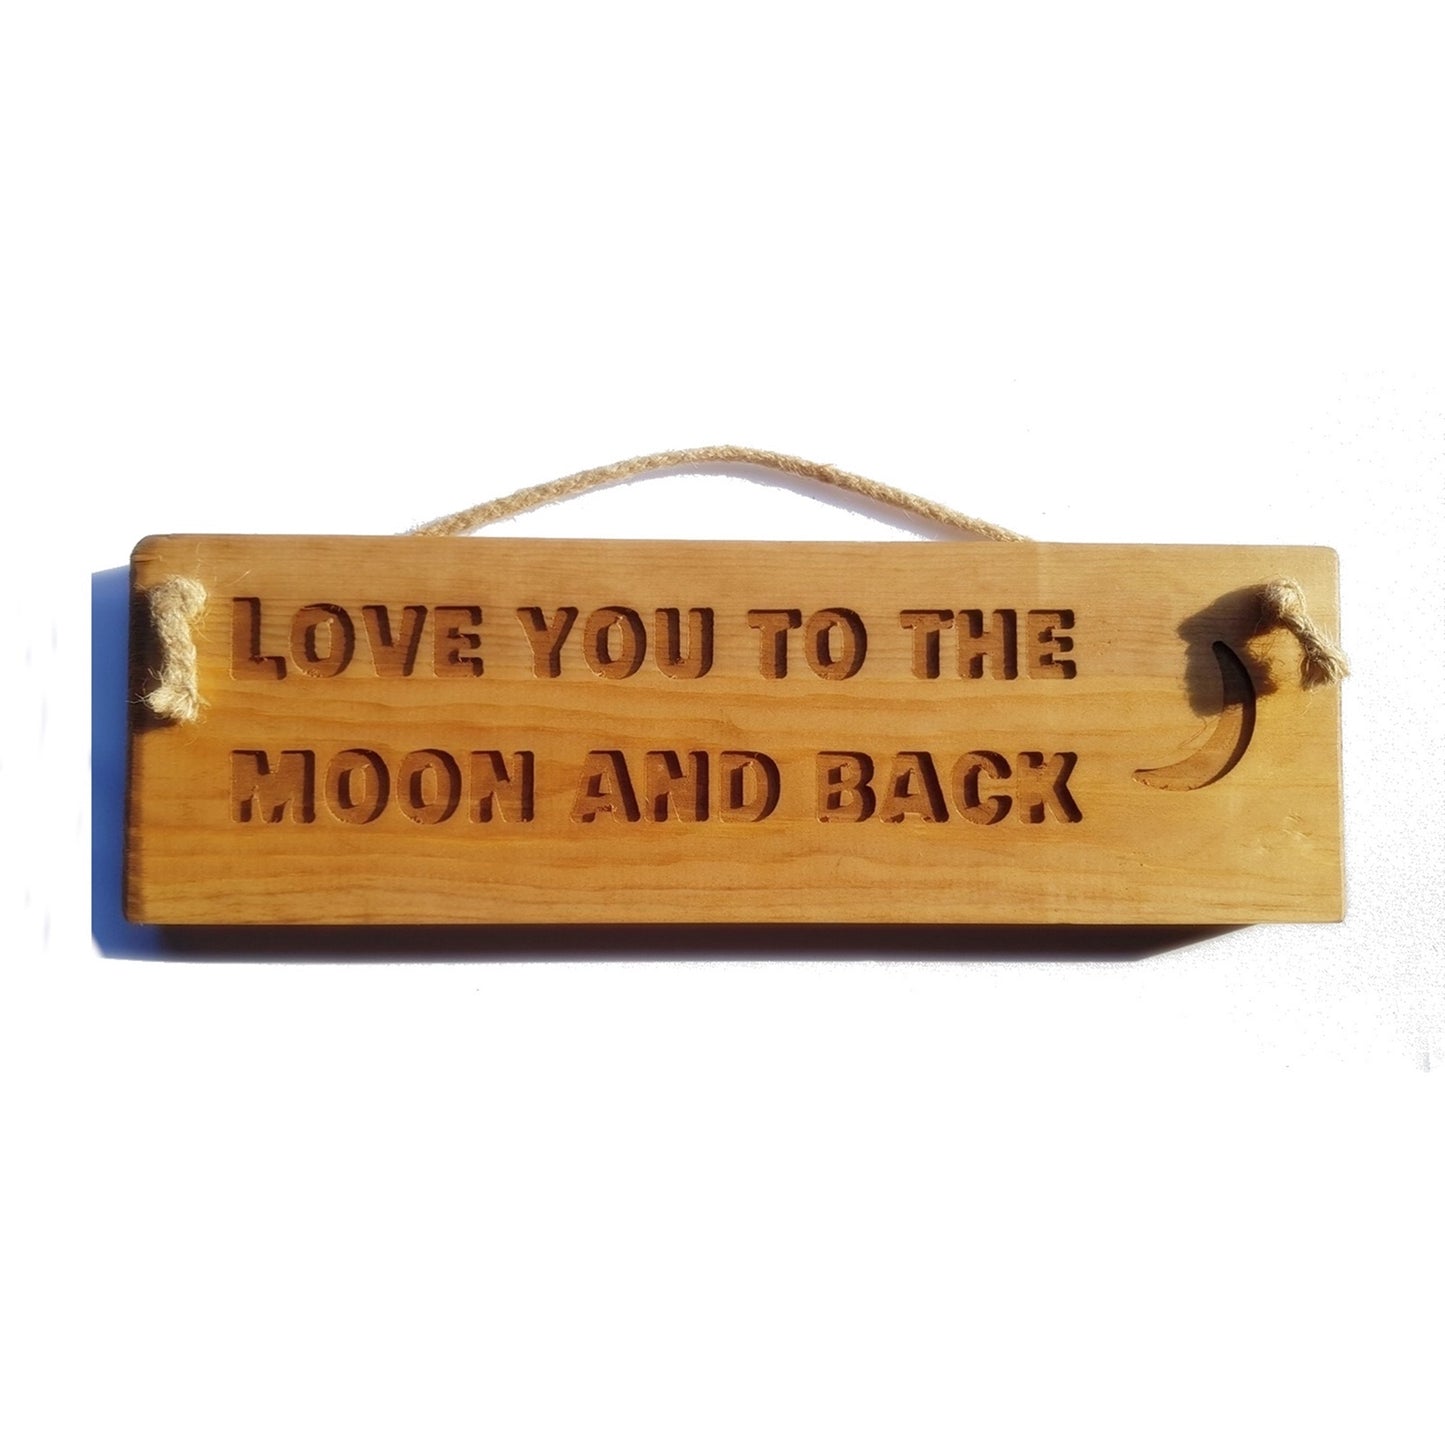 Wooden engraved Rustic 30cm Sign Natural  "Love you to the moon and back"